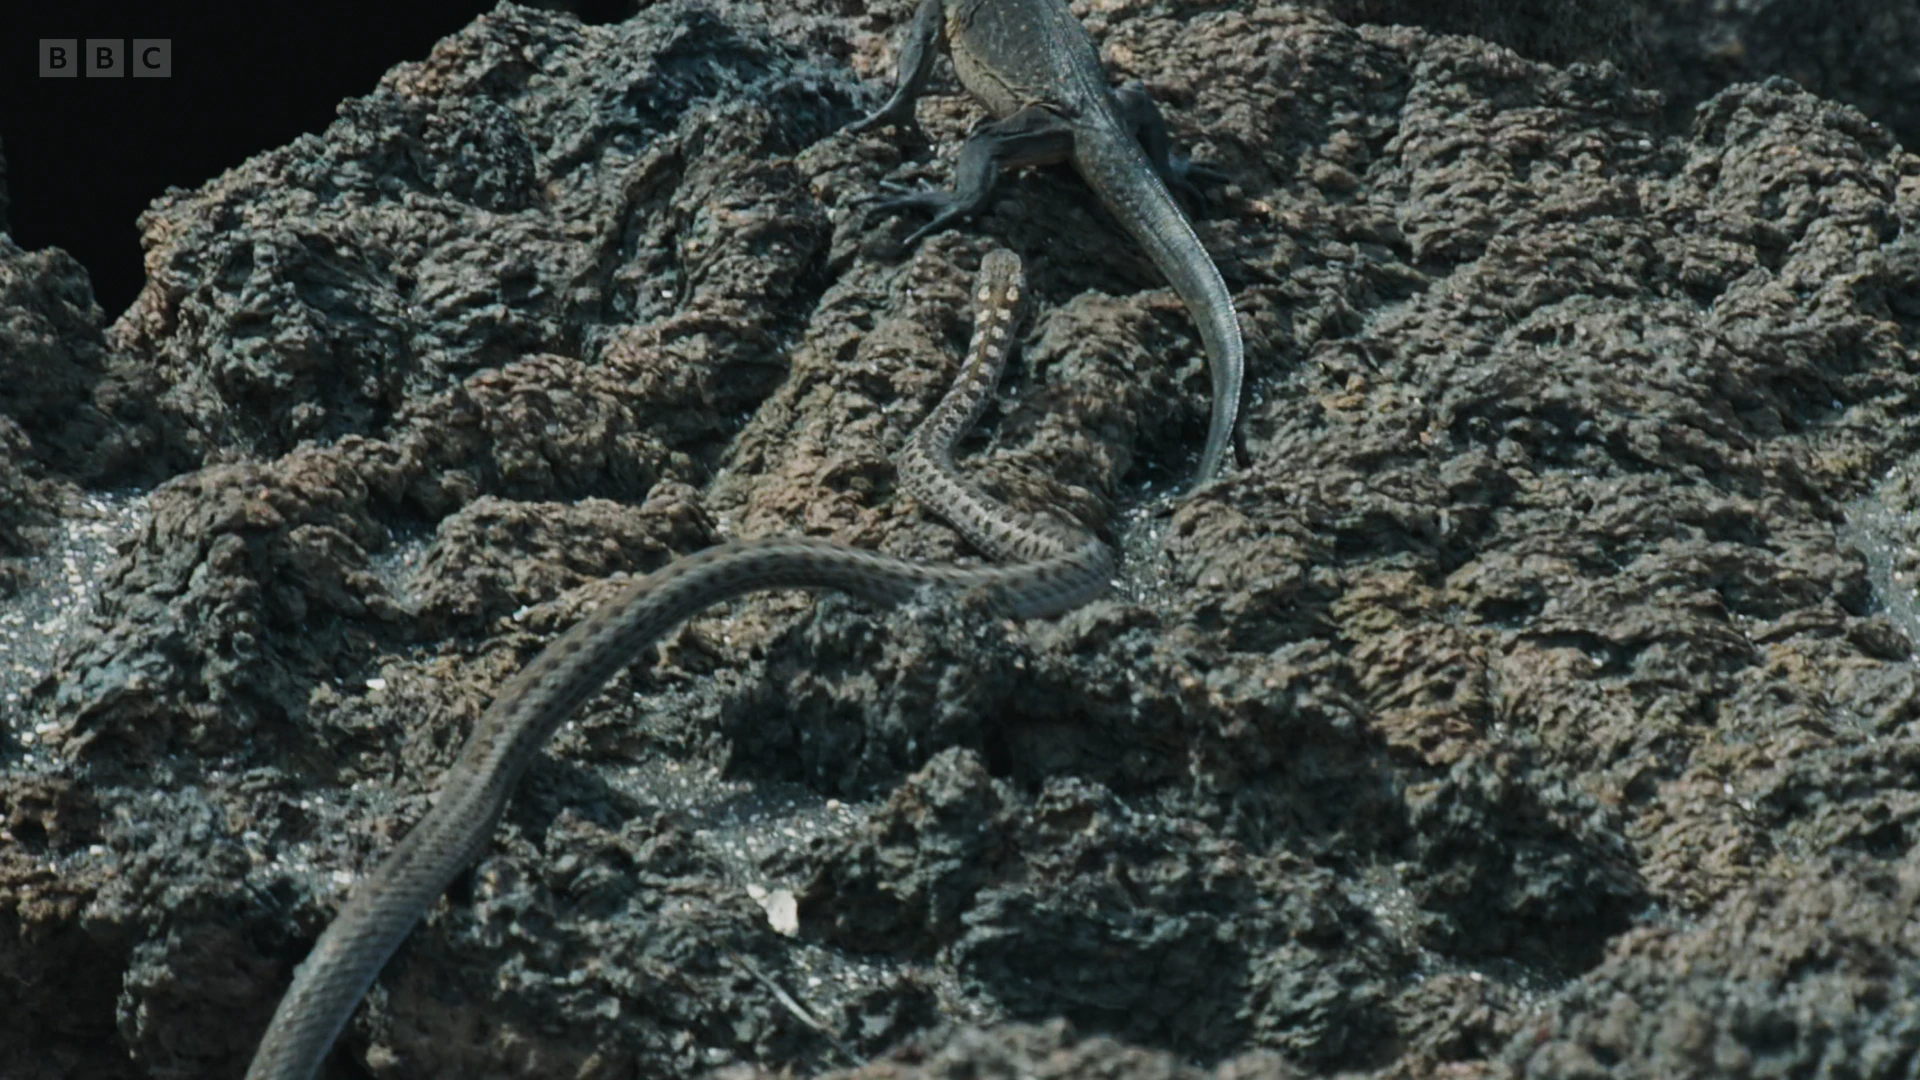 Western Galápagos racer (Pseudalsophis occidentalis) as shown in Planet Earth II - Islands